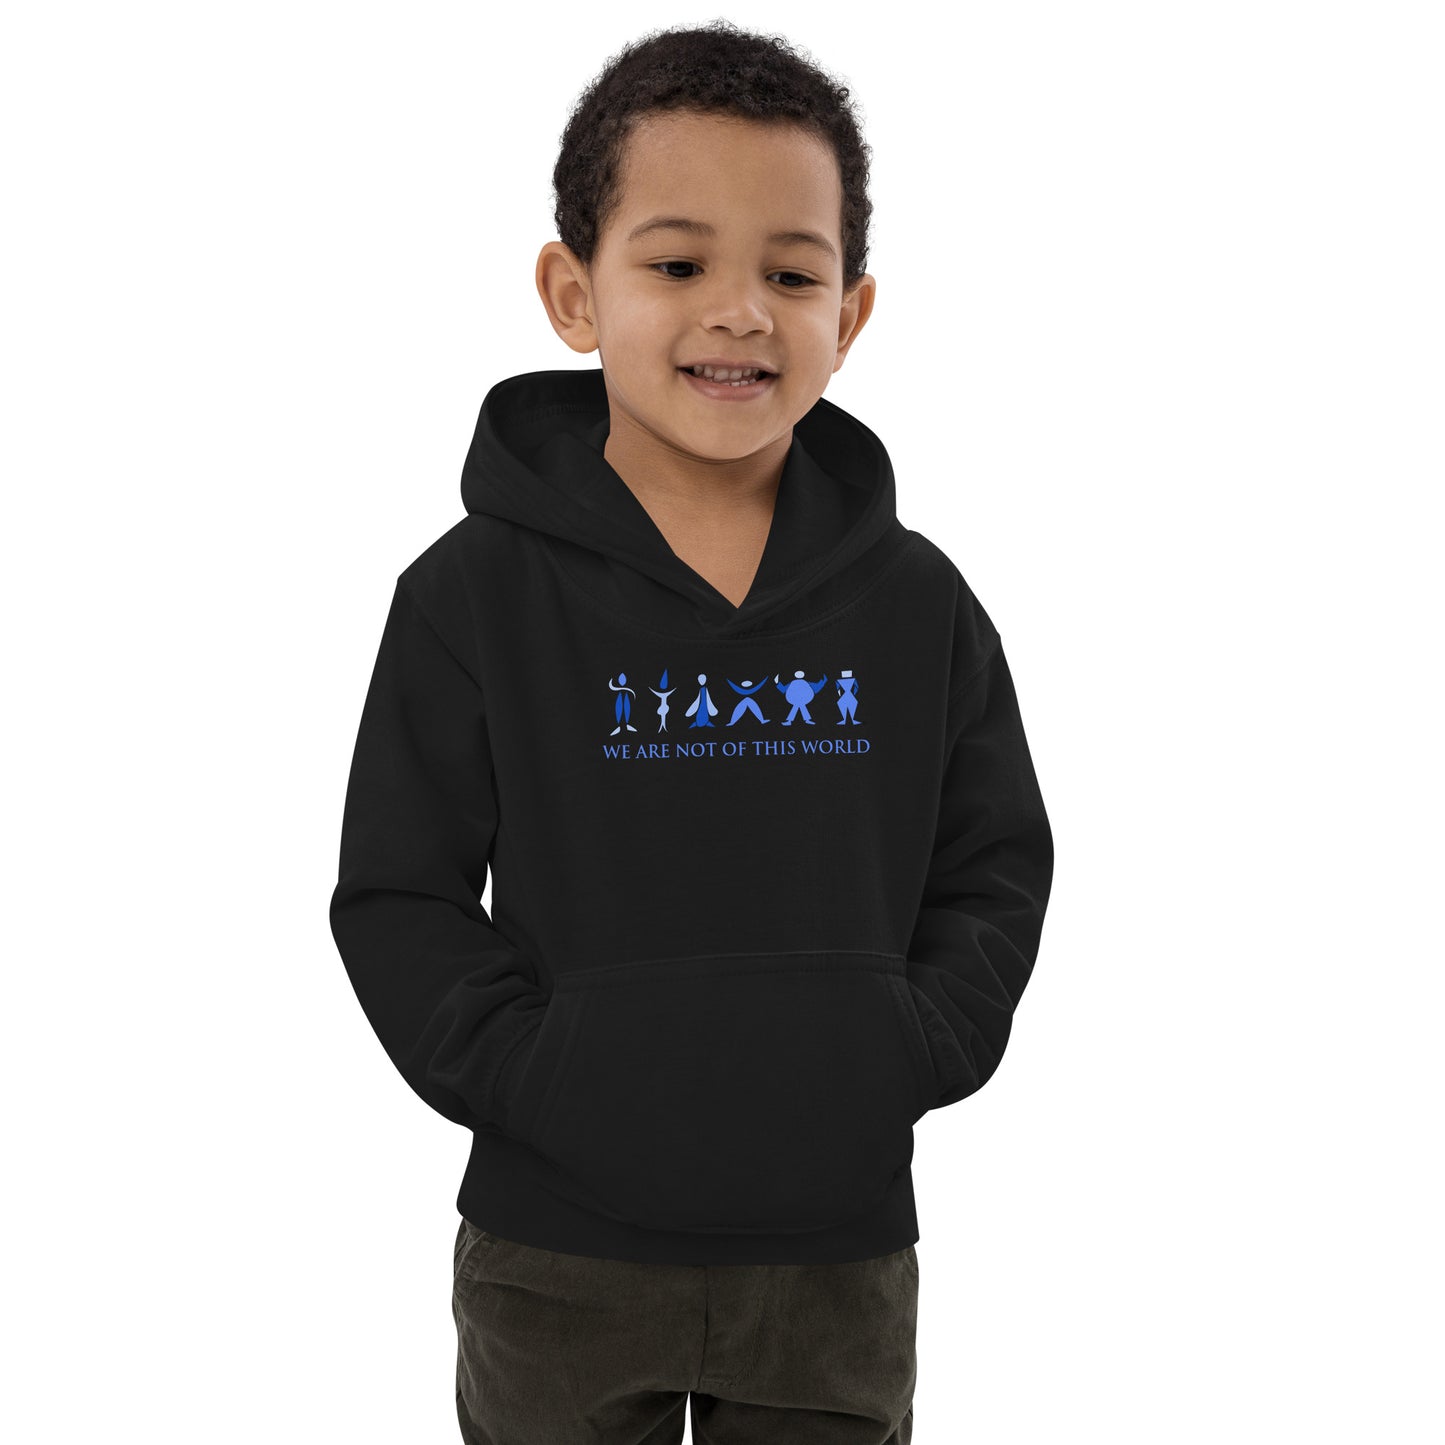 We Are Not of This World Kids Hoodie